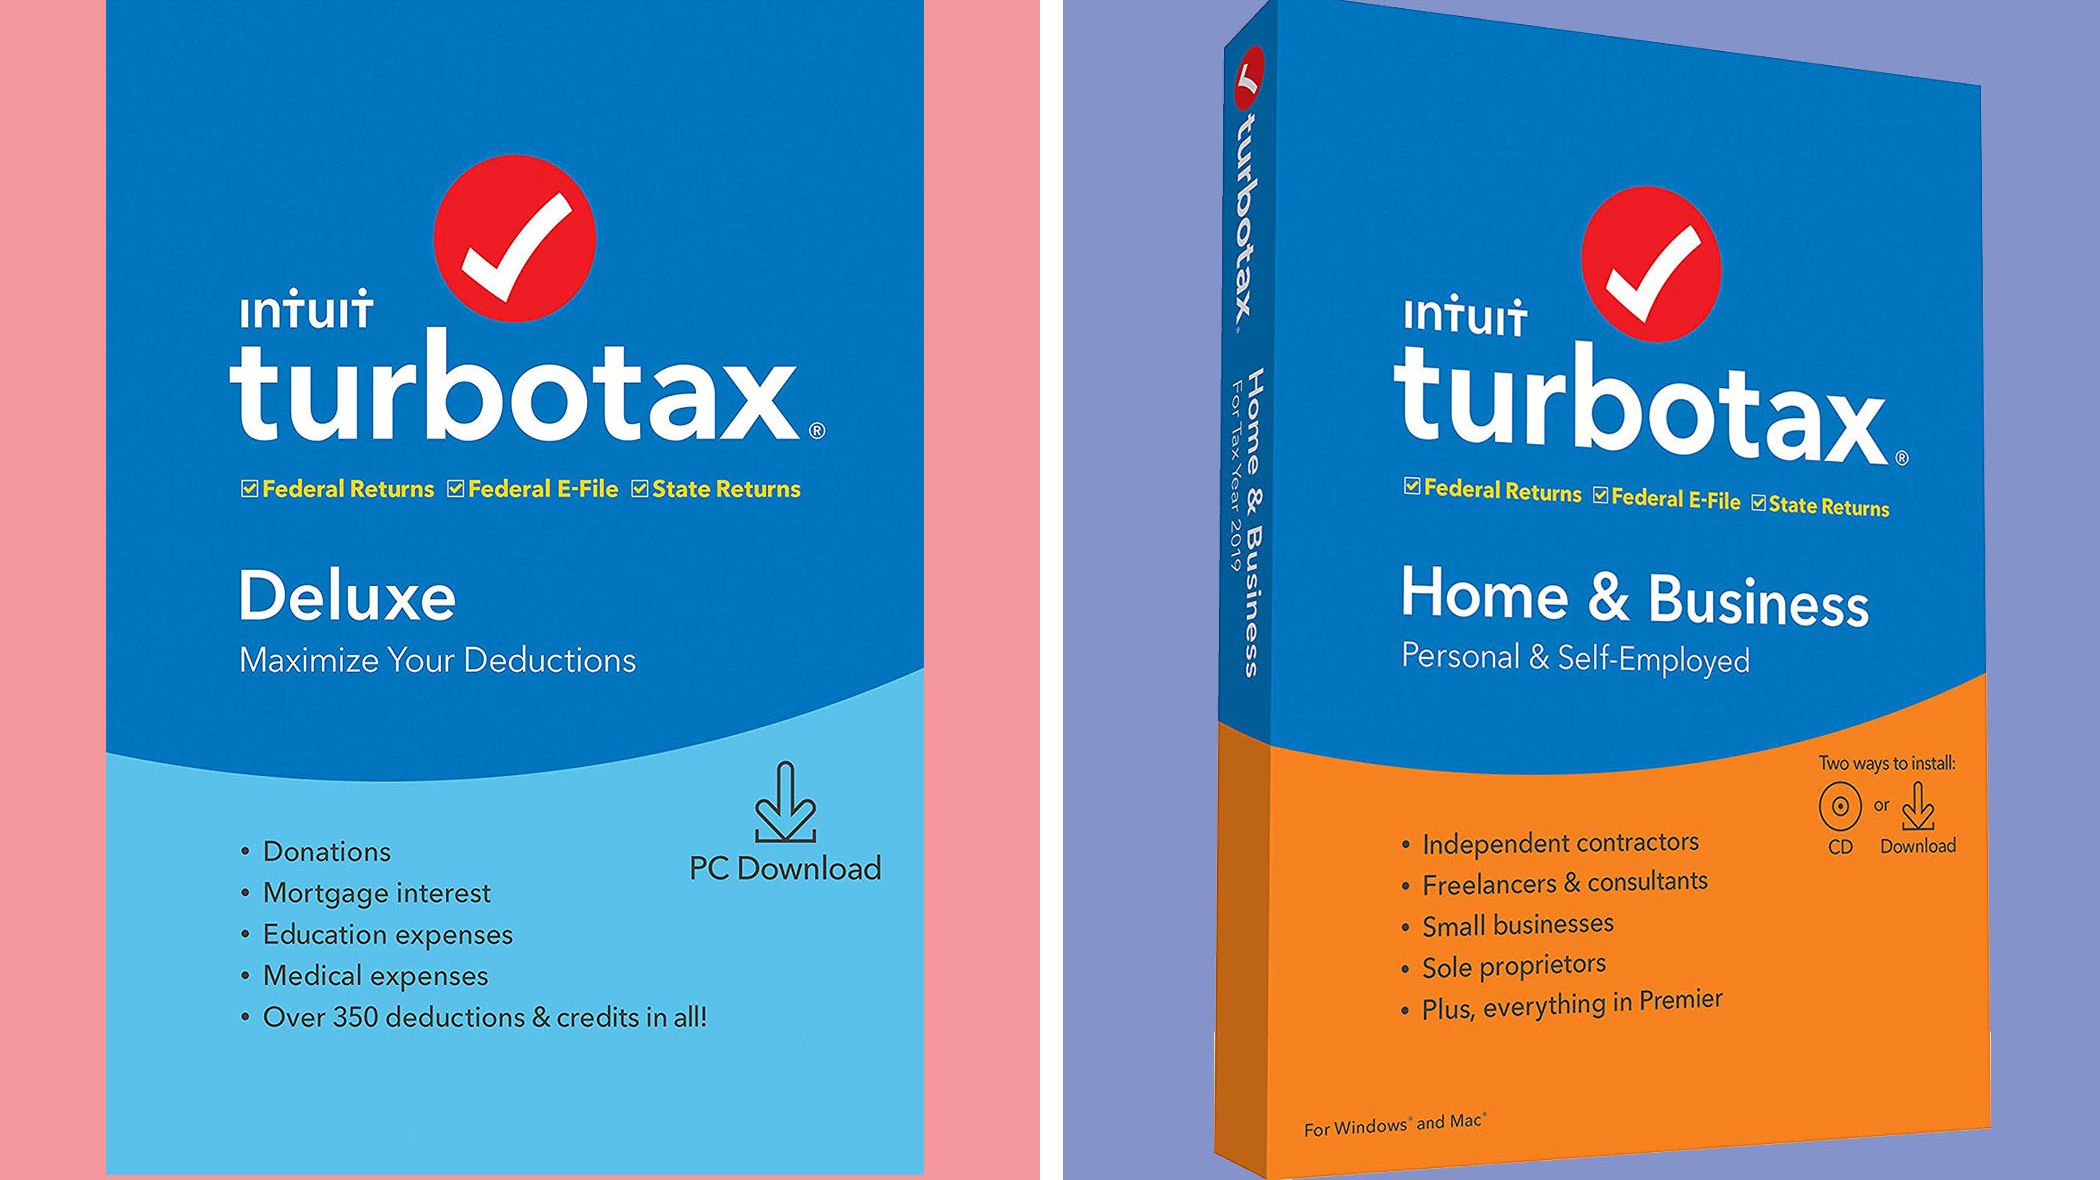 turbo tax small business for mac